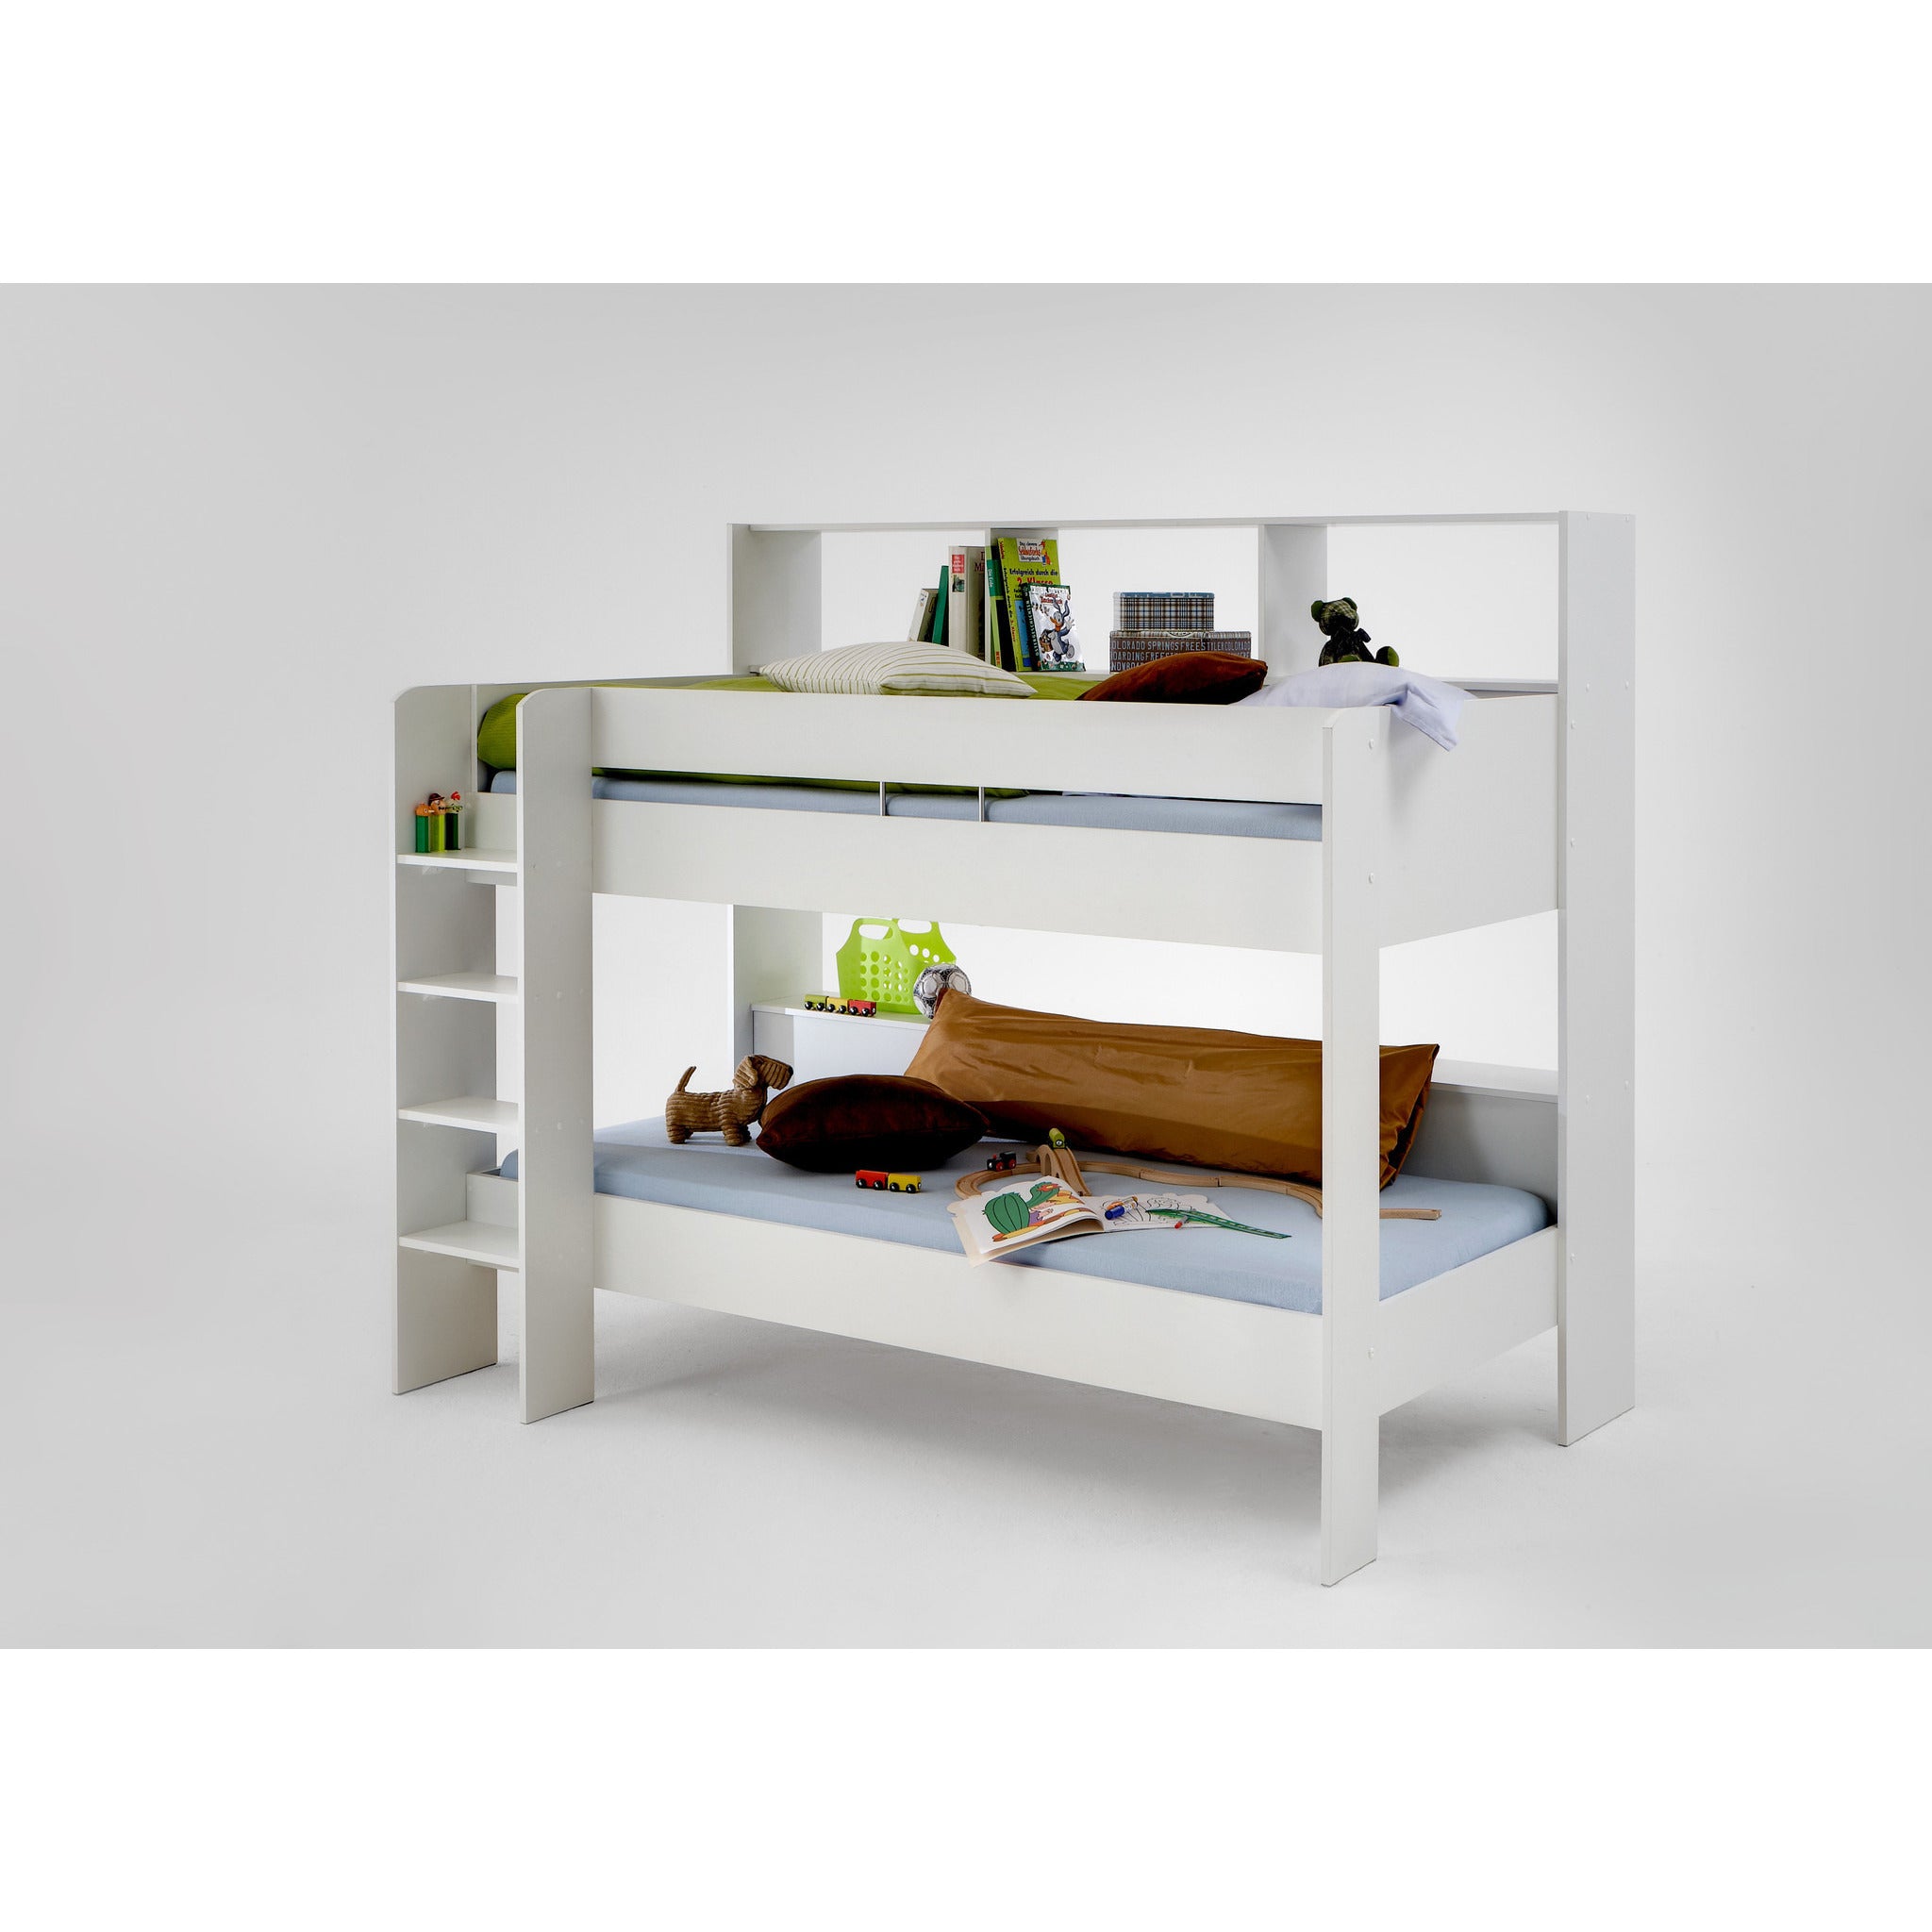 Emili Childrens Kids Bunk Beds Twin Or Single With Desk